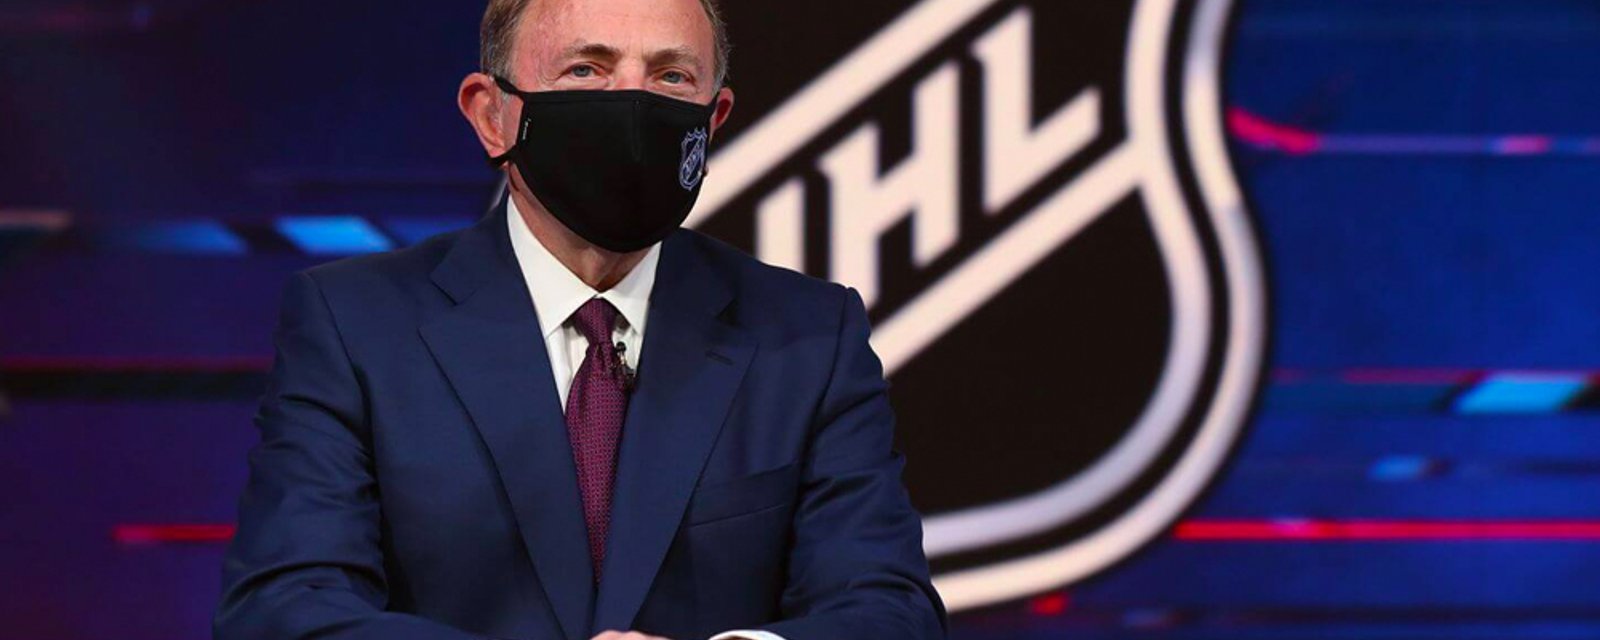 Report: NHL has asked employees for proof of vaccination or be placed on unpaid leave